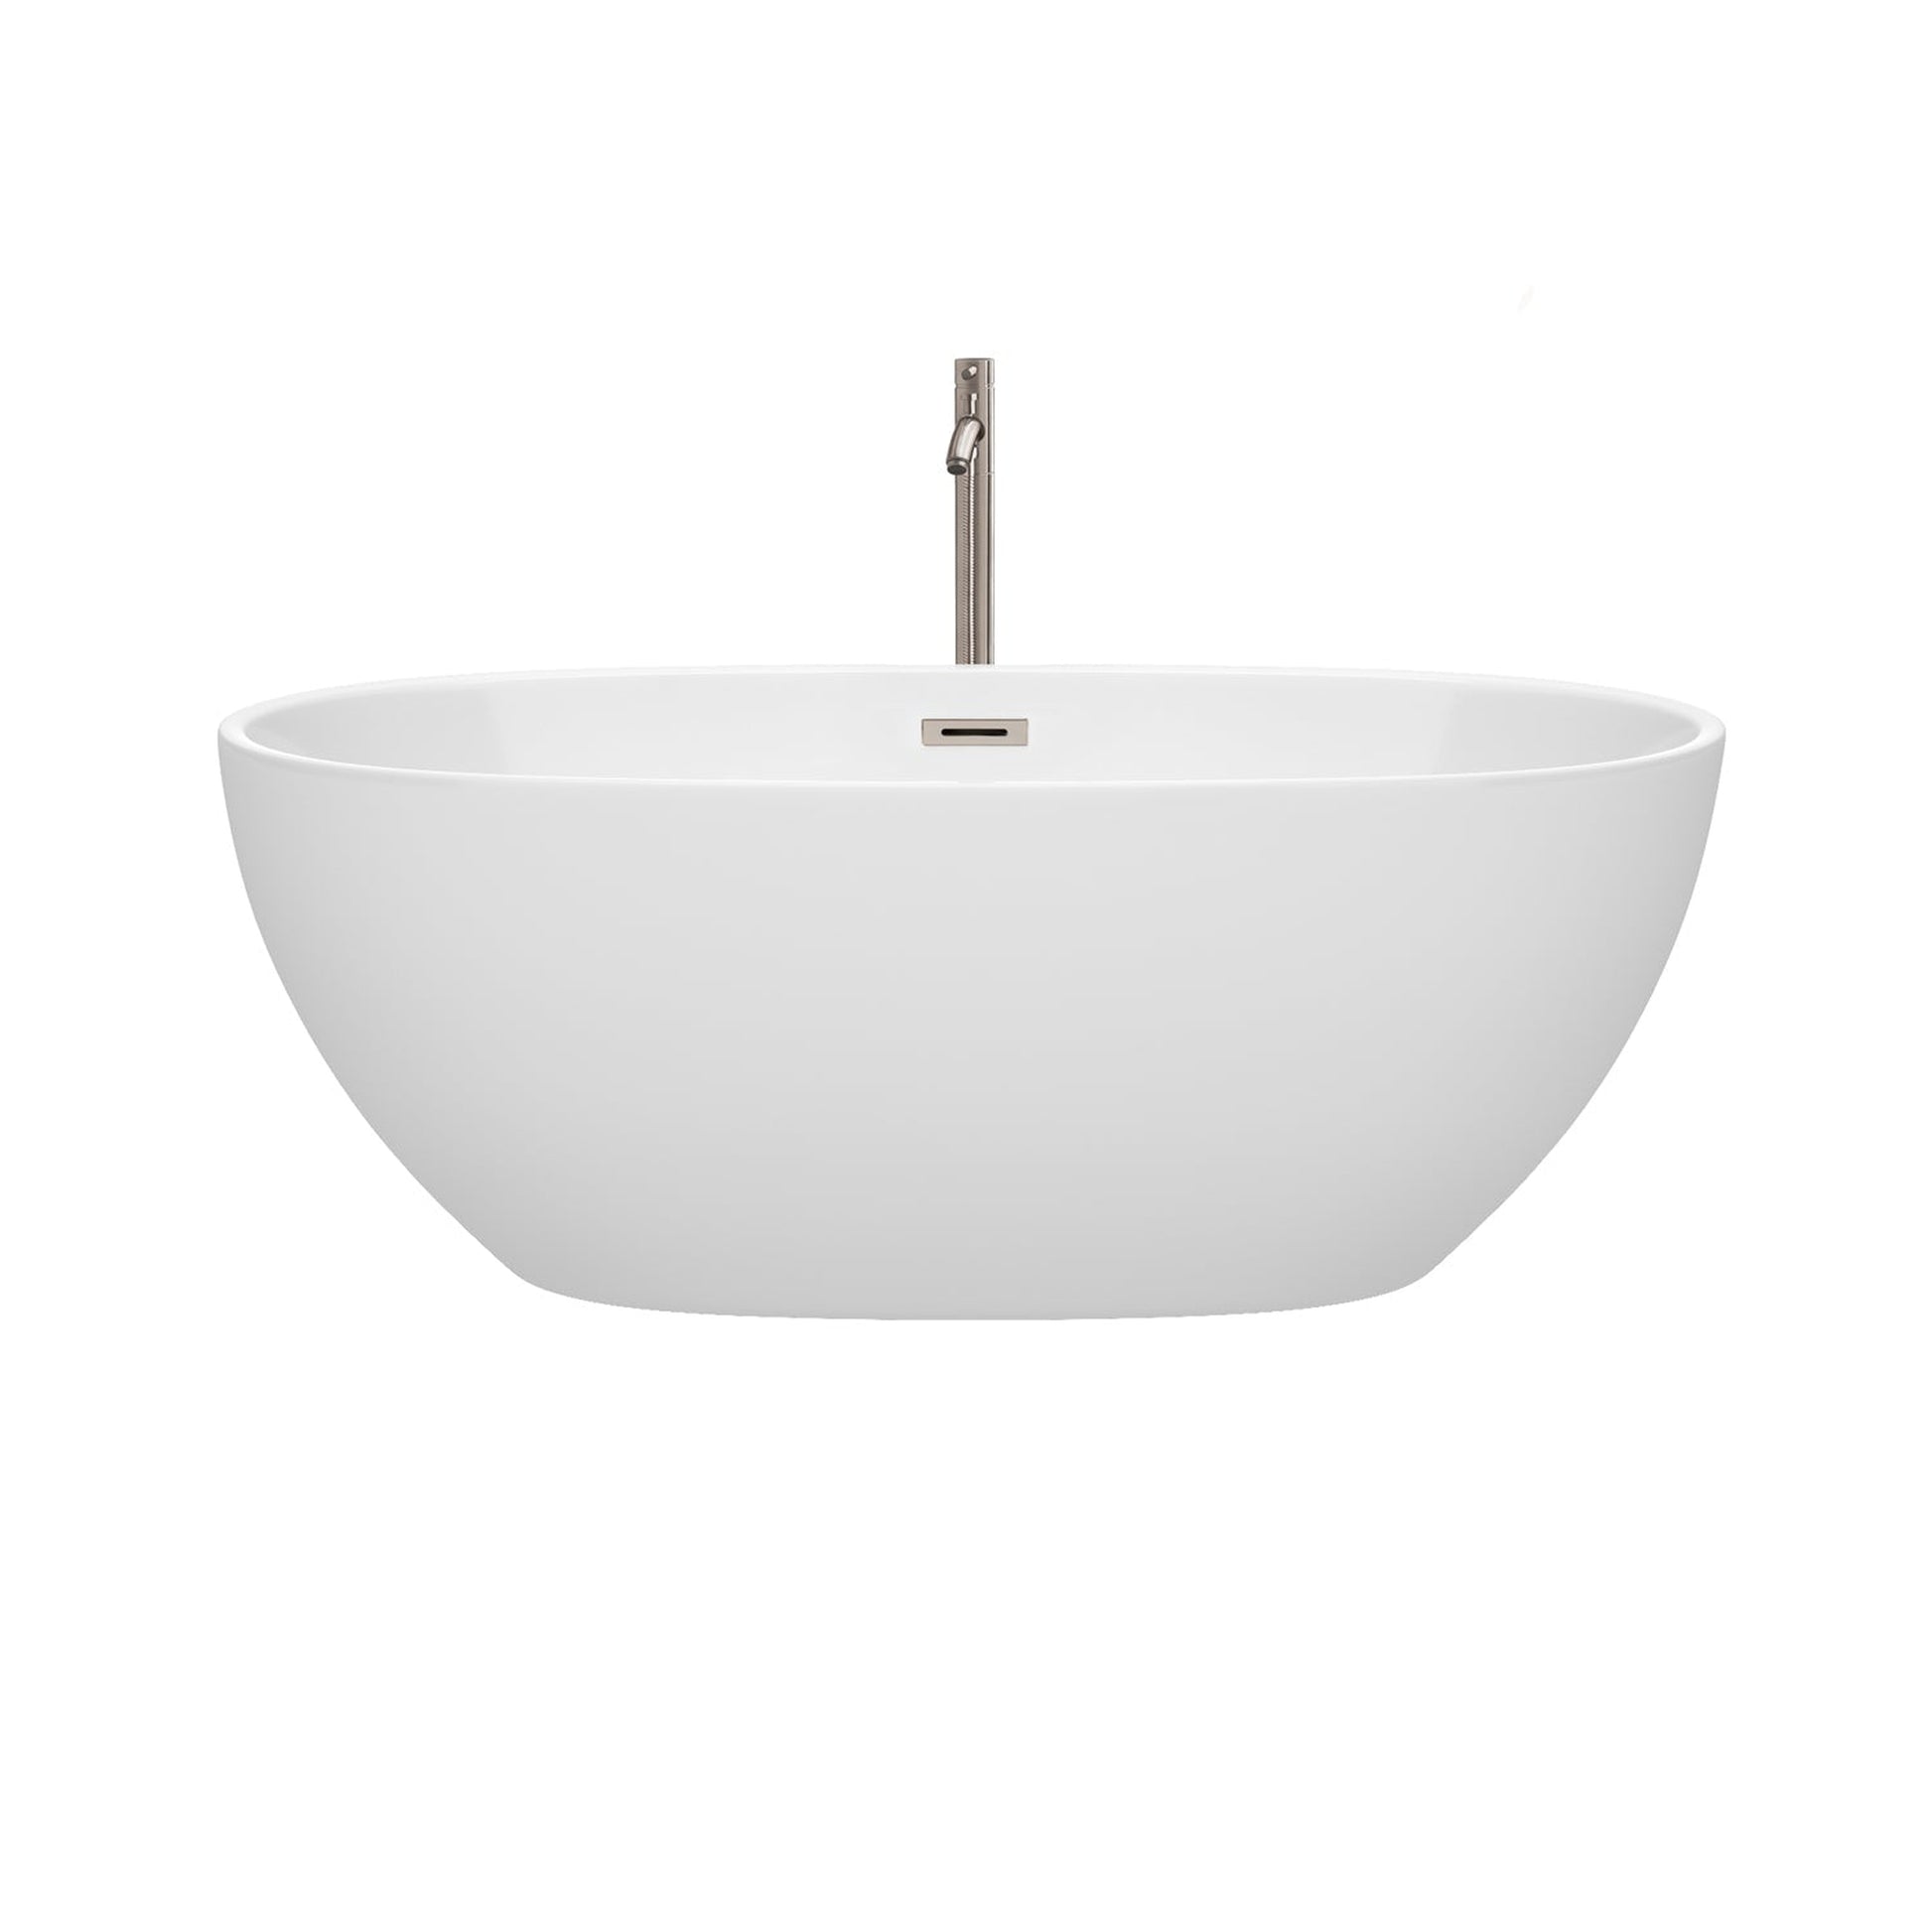 Wyndham Collection Juno 63" Freestanding Bathtub in White With Floor Mounted Faucet, Drain and Overflow Trim in Brushed Nickel